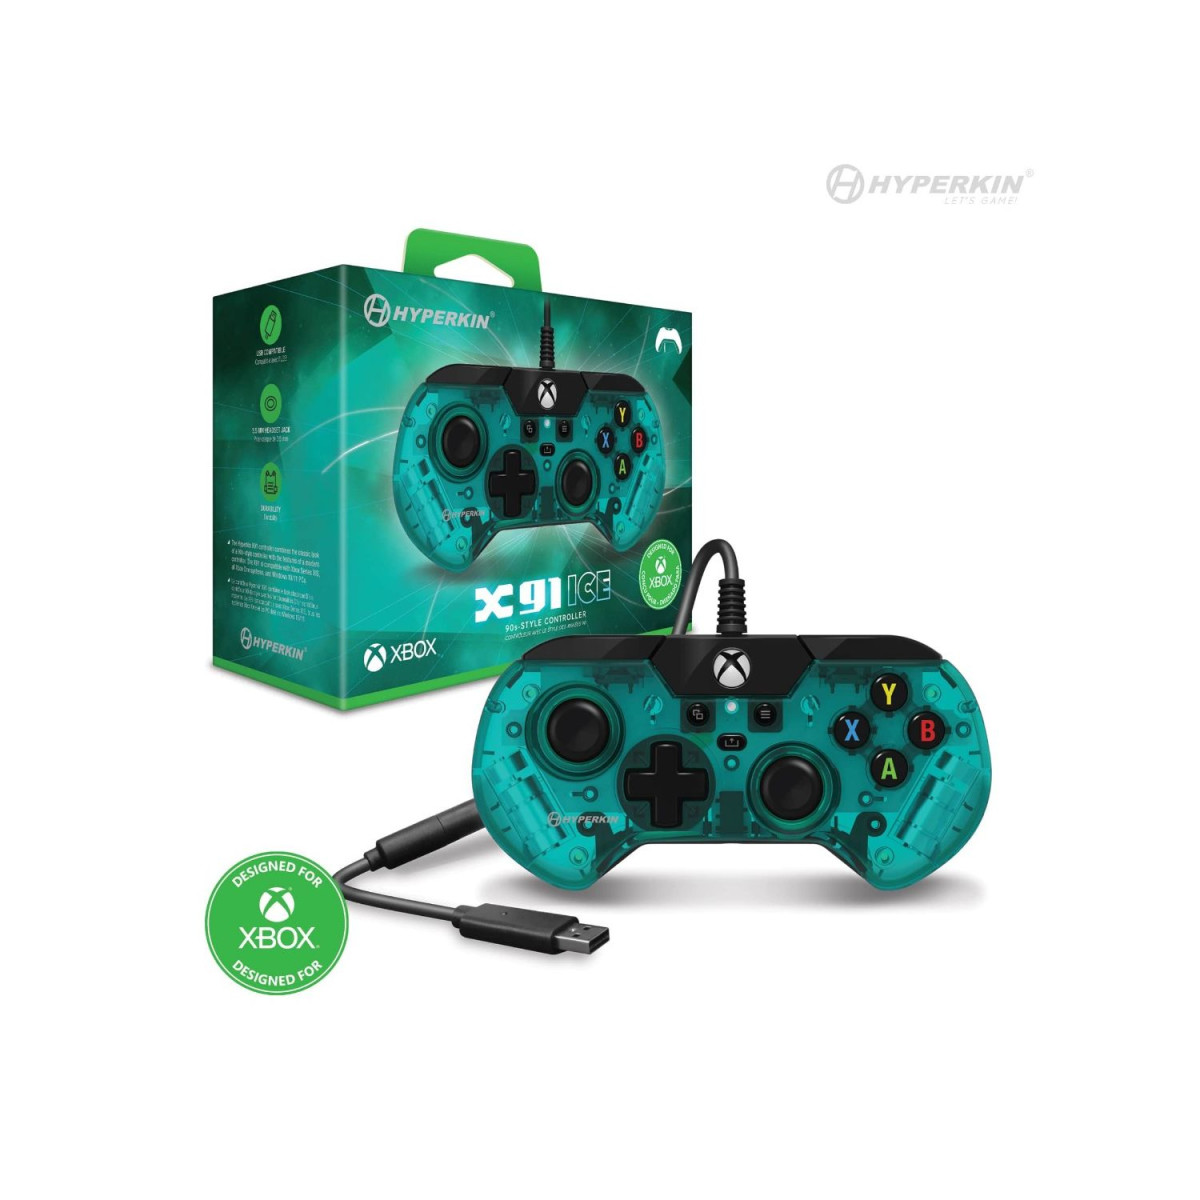 X91 Wired Controller - Green